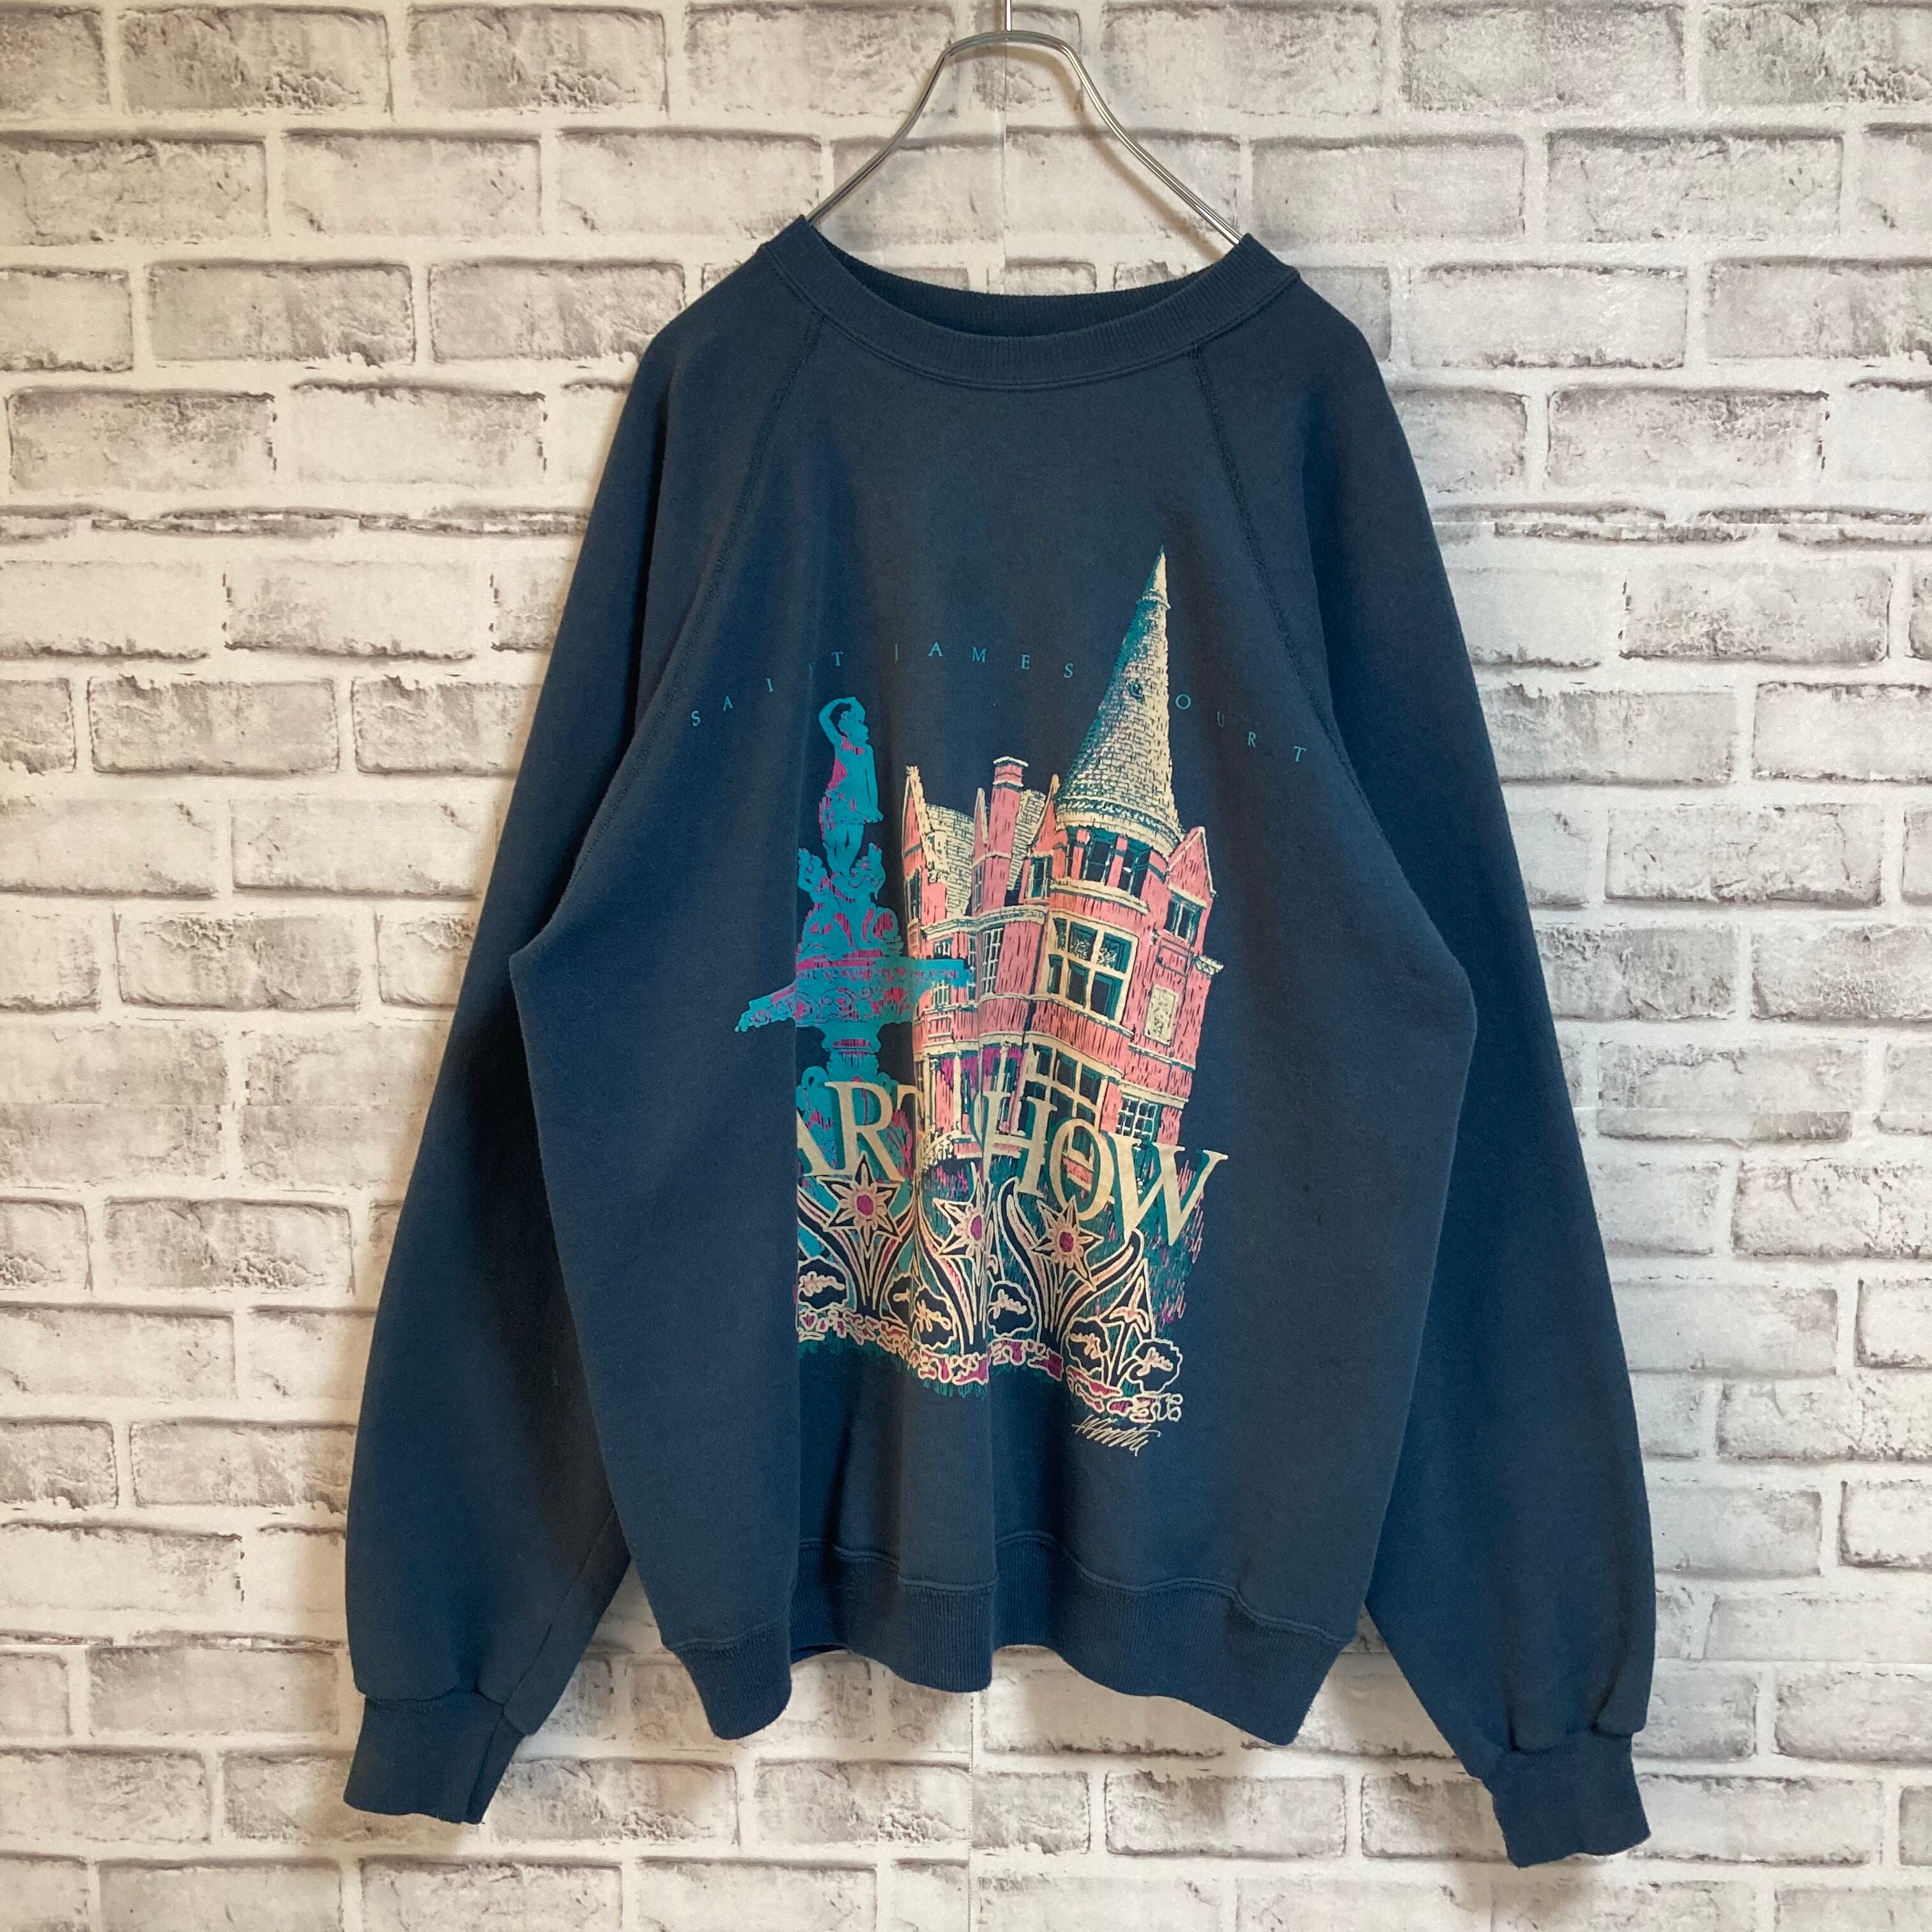 Hanes】L/S Sweat XL 90s Made in USA “SAINT JAMES COURT